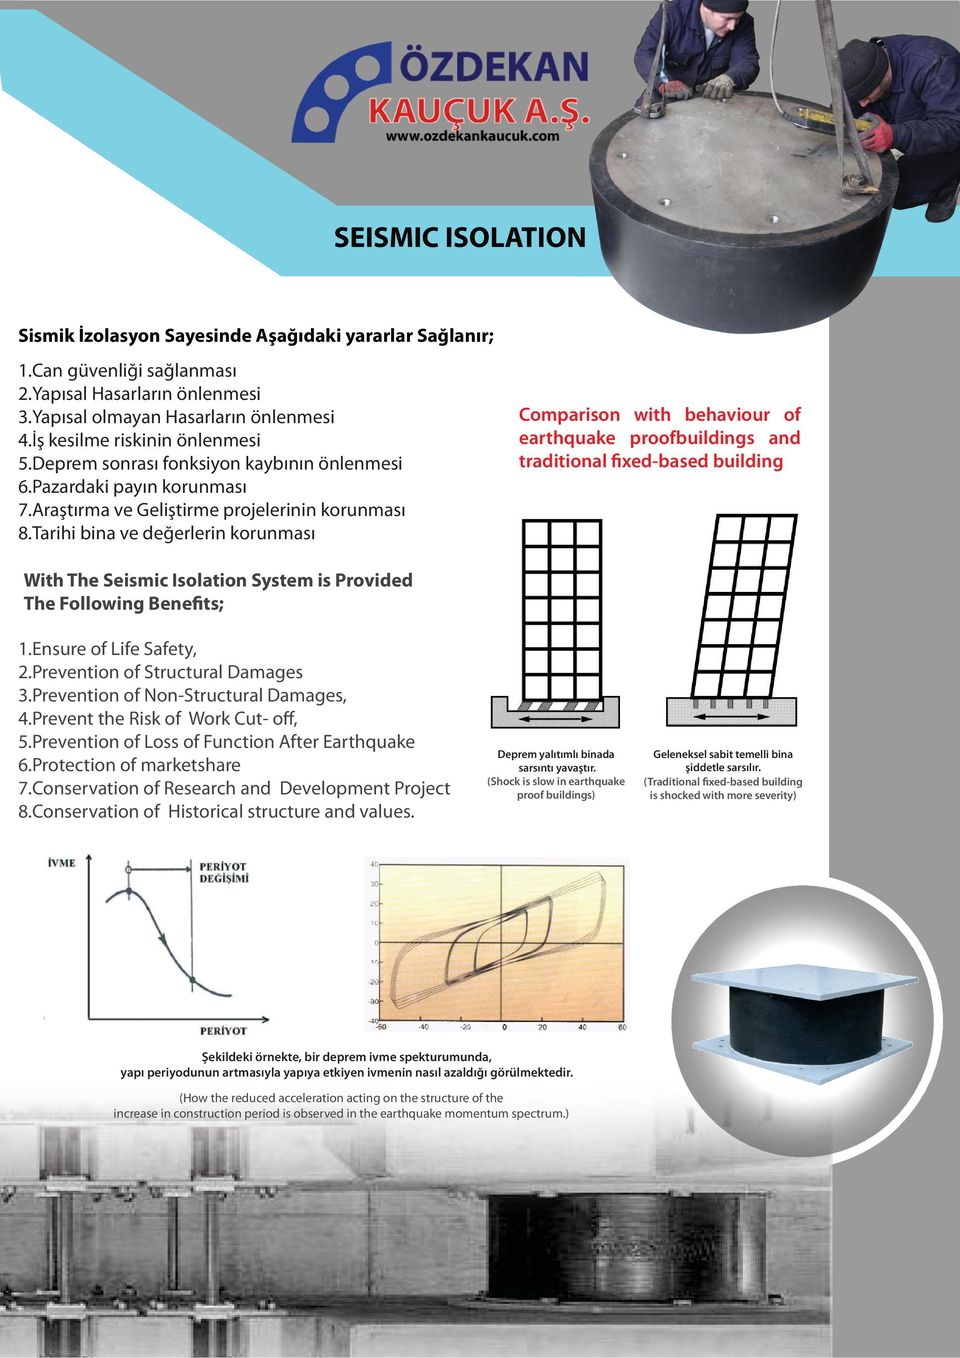 Tarihi bina ve değerlerin korunması Comparison with behaviour of earthquake proofbuildings and traditional fixed-based building With The Seismic Isolation System is Provided The Following Benefits; 1.